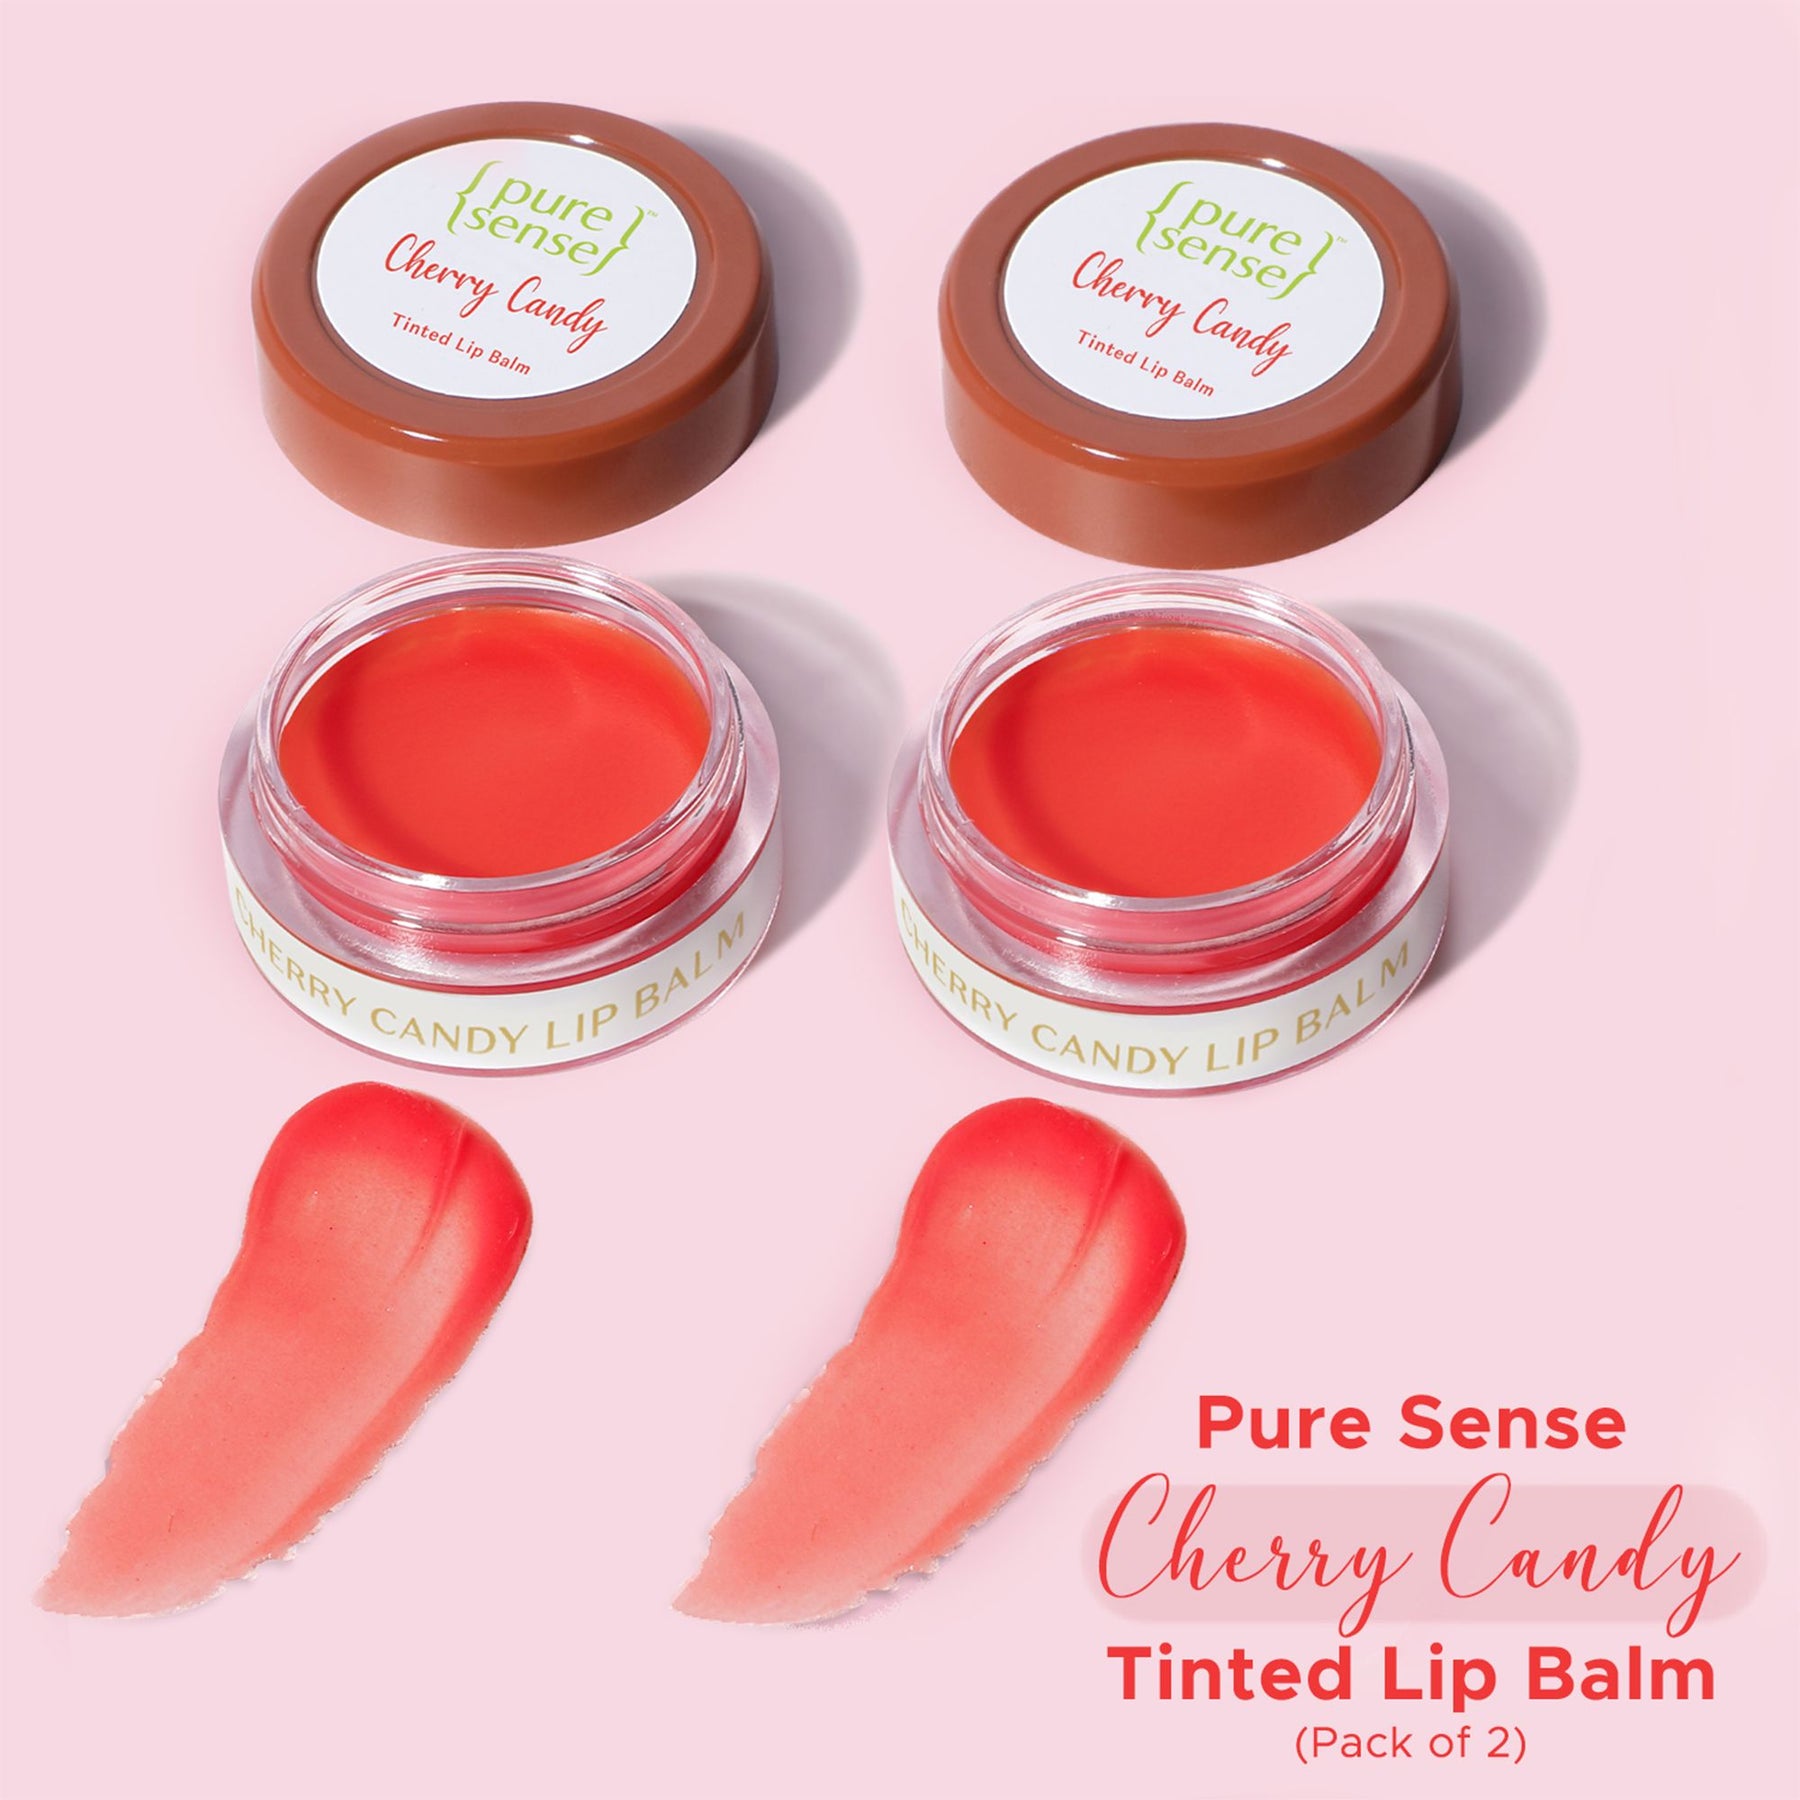 Cherry Candy Tinted Lip Balm combo - Pack of 2 |  From the makers of Parachute Advansed | 10 ml